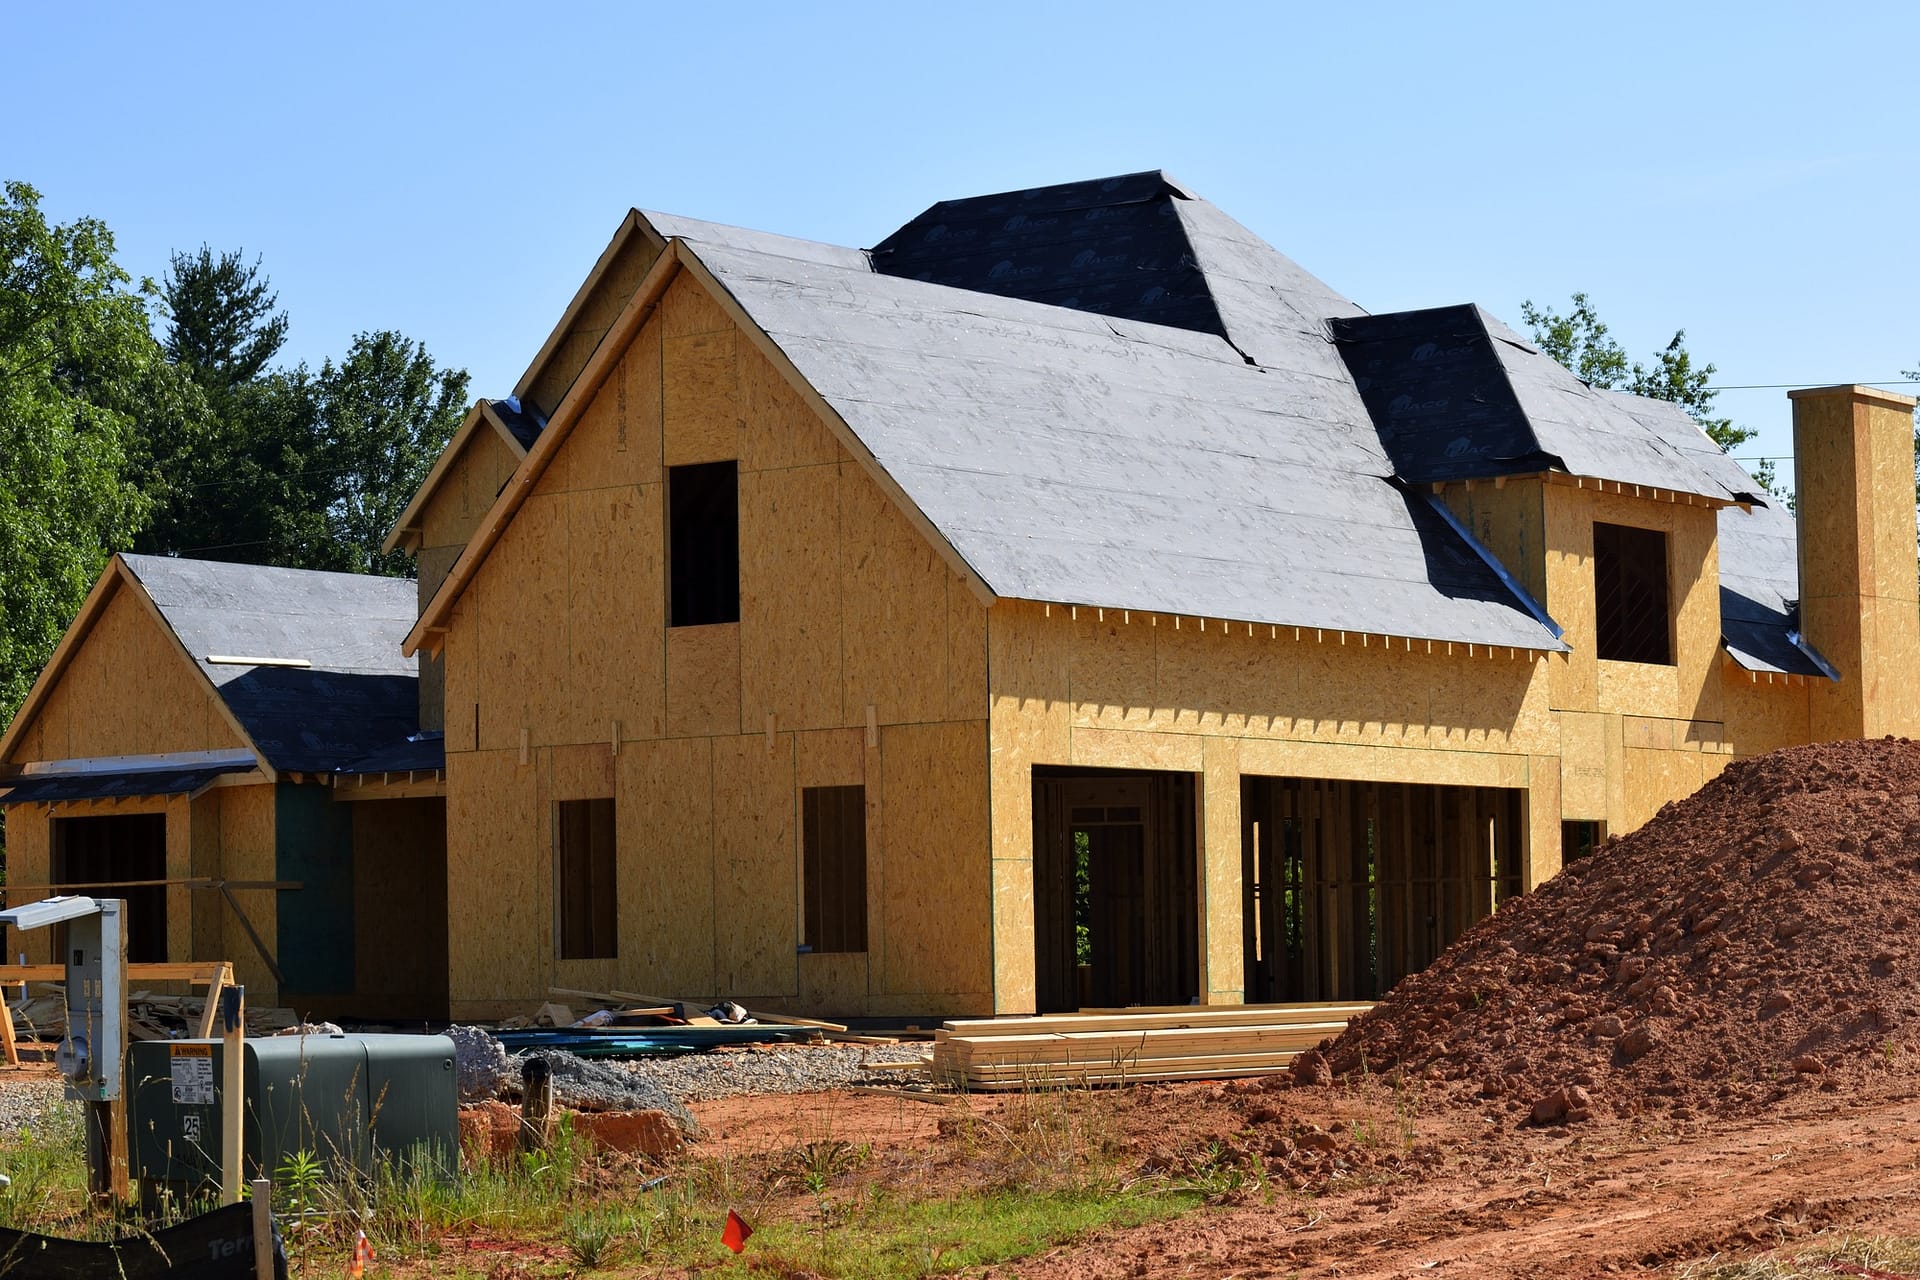 How Much Does it Cost to Build a House Yourself?